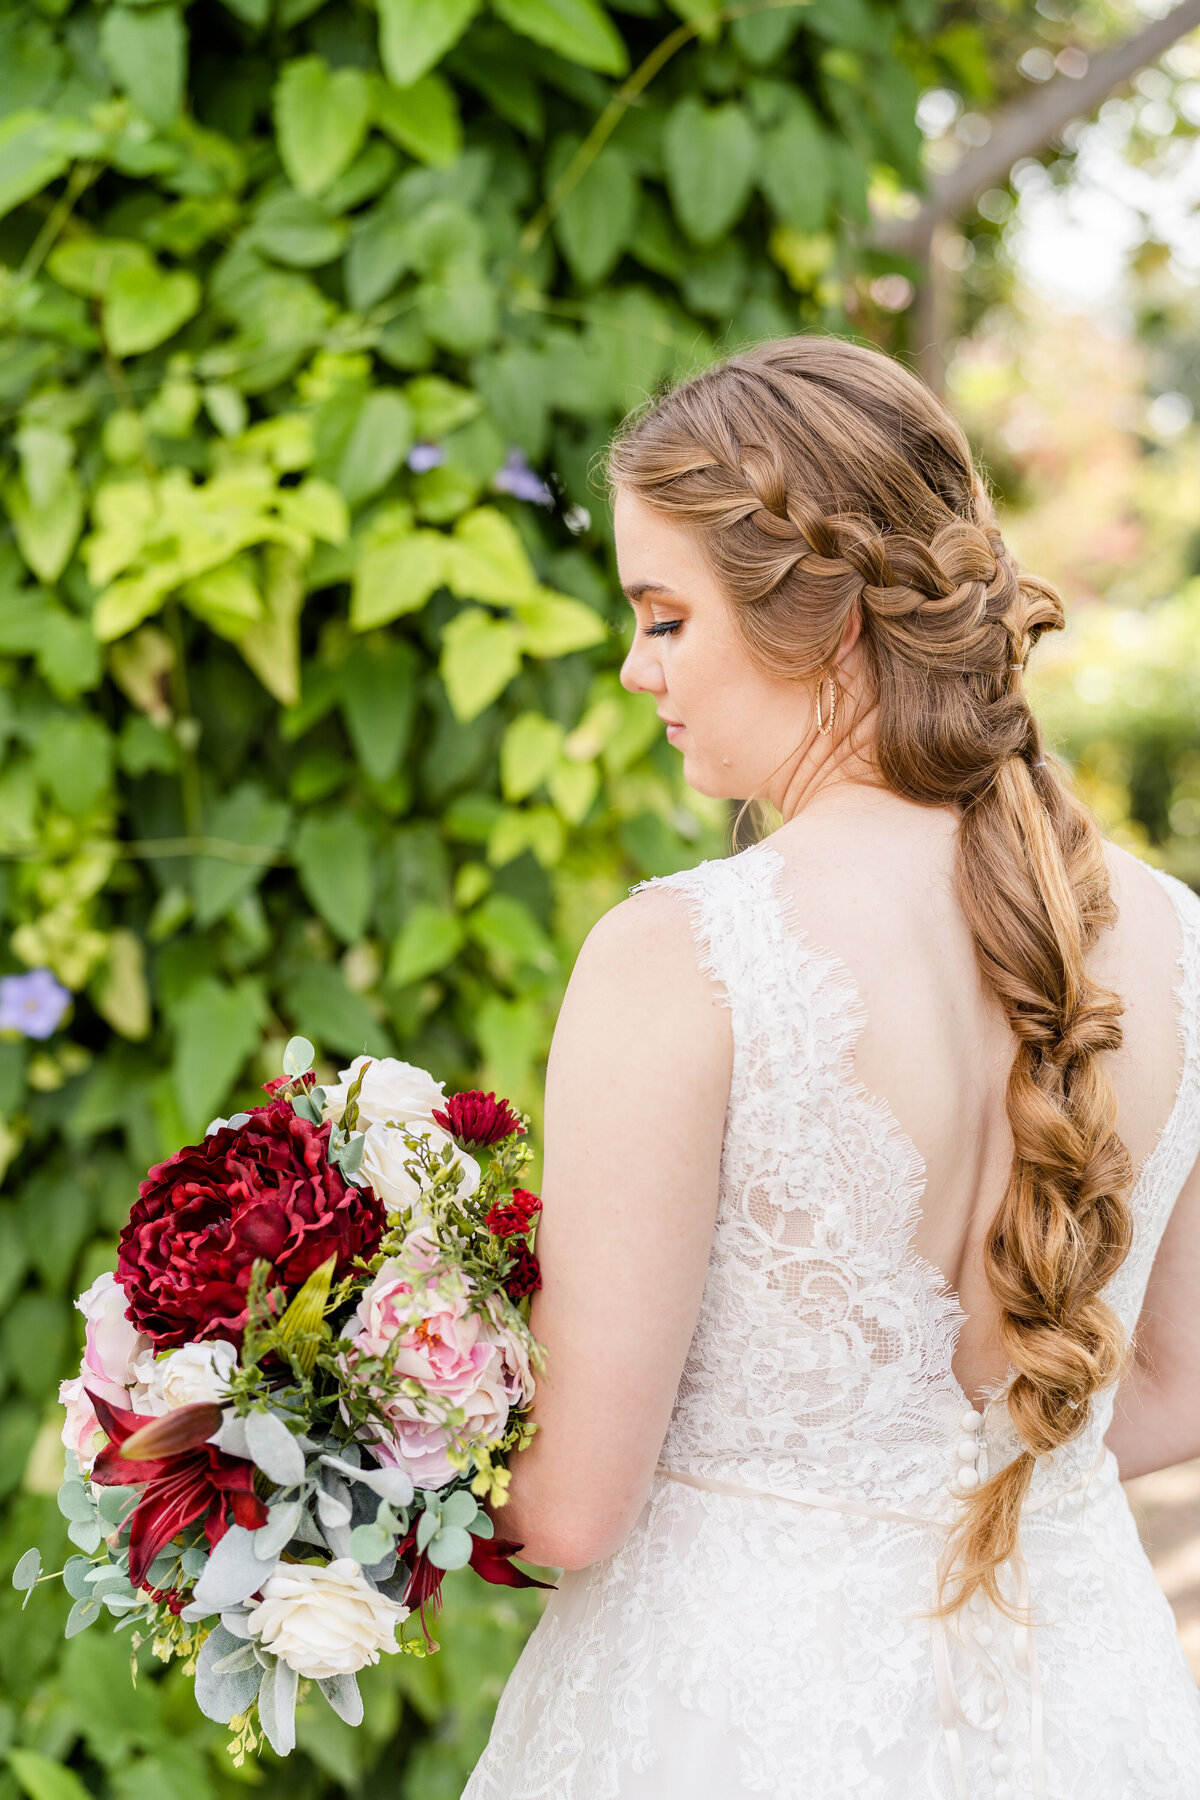 Bride with braided hair looking at bouquet  surrounded by greenery